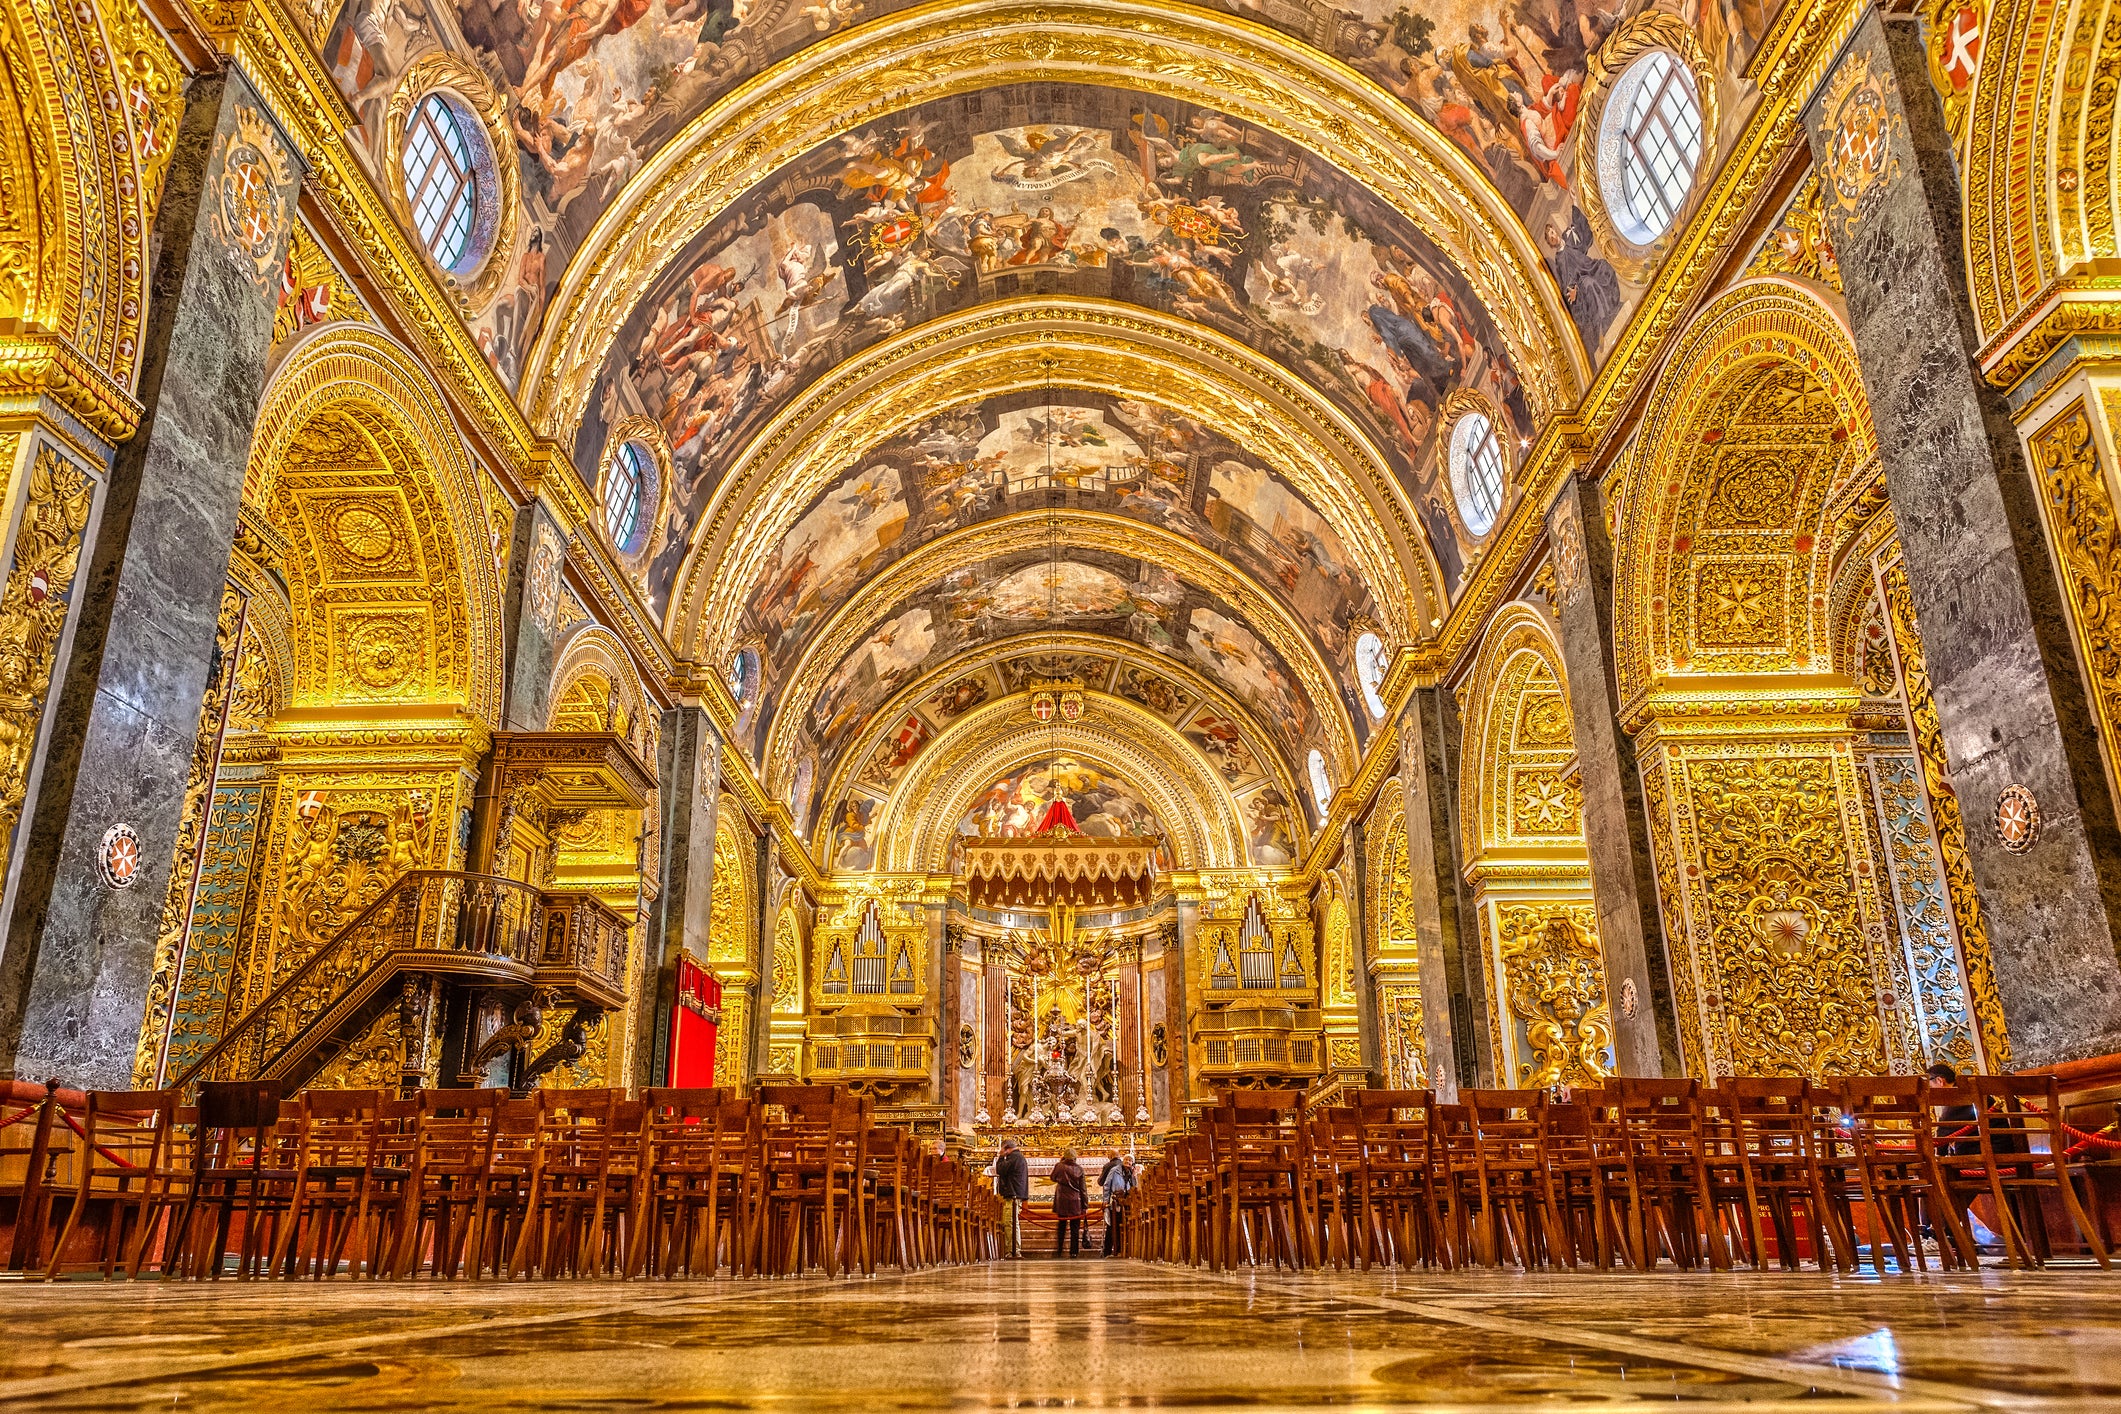 The Baroque building is laden with tapestries, chapels and a series of tombs accented with gold